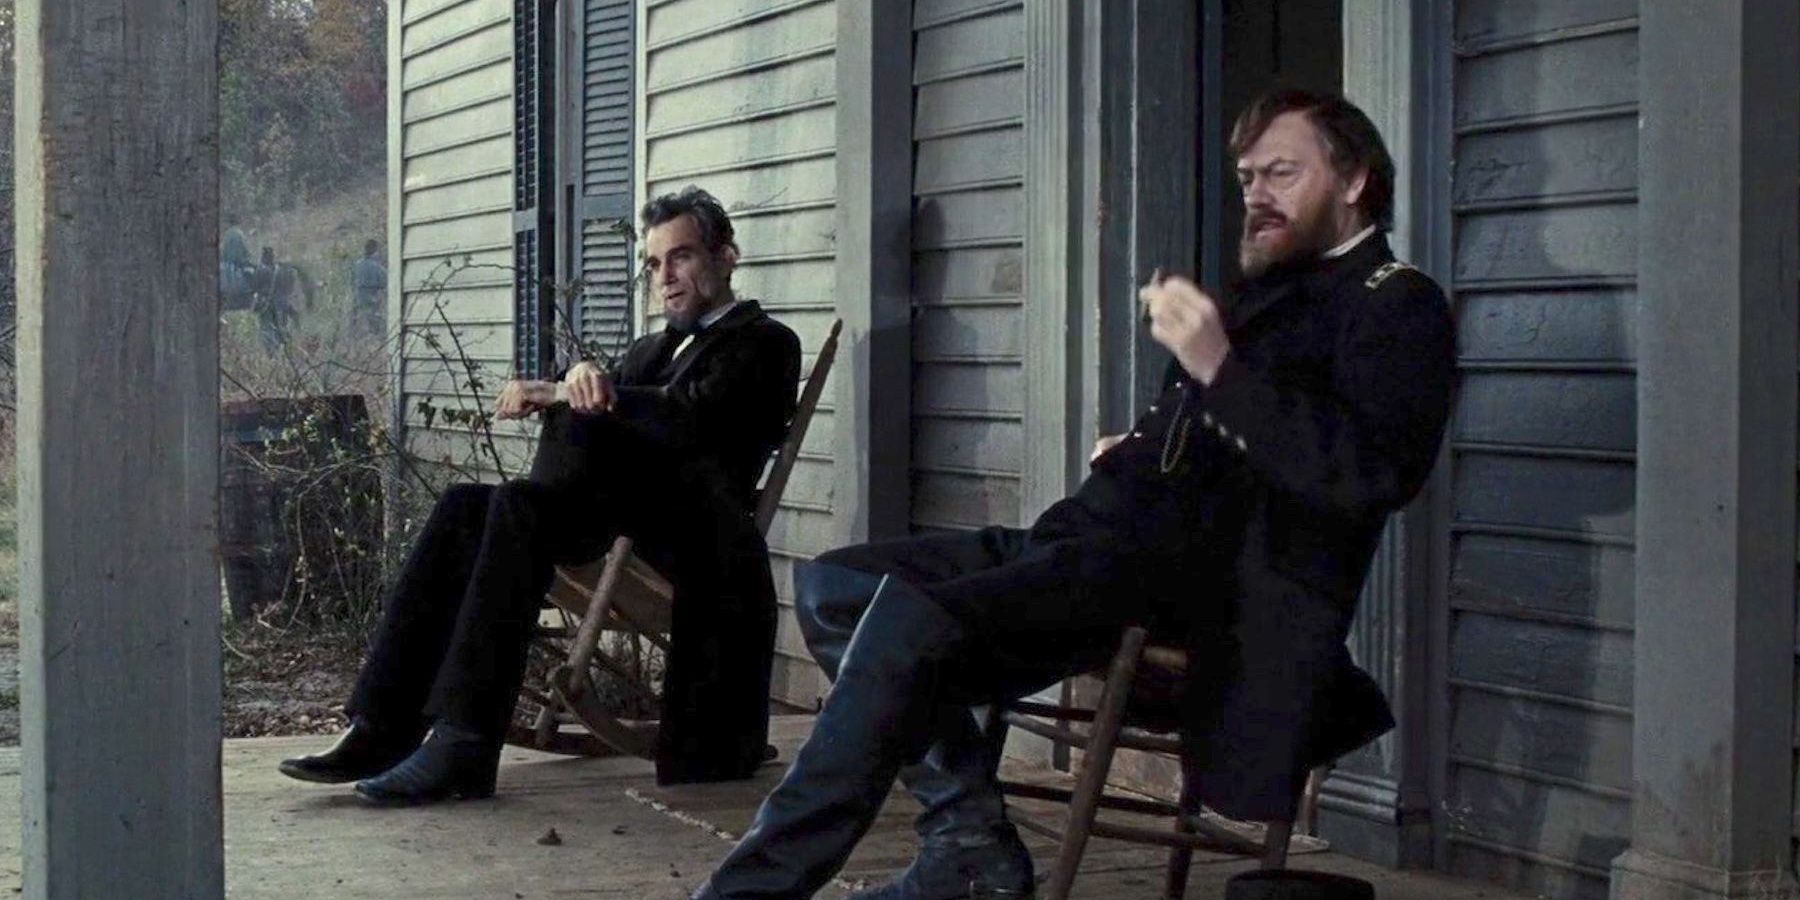 Abrahan Lincoln and Ulysses S. Grant talking on the porch in Lincoln